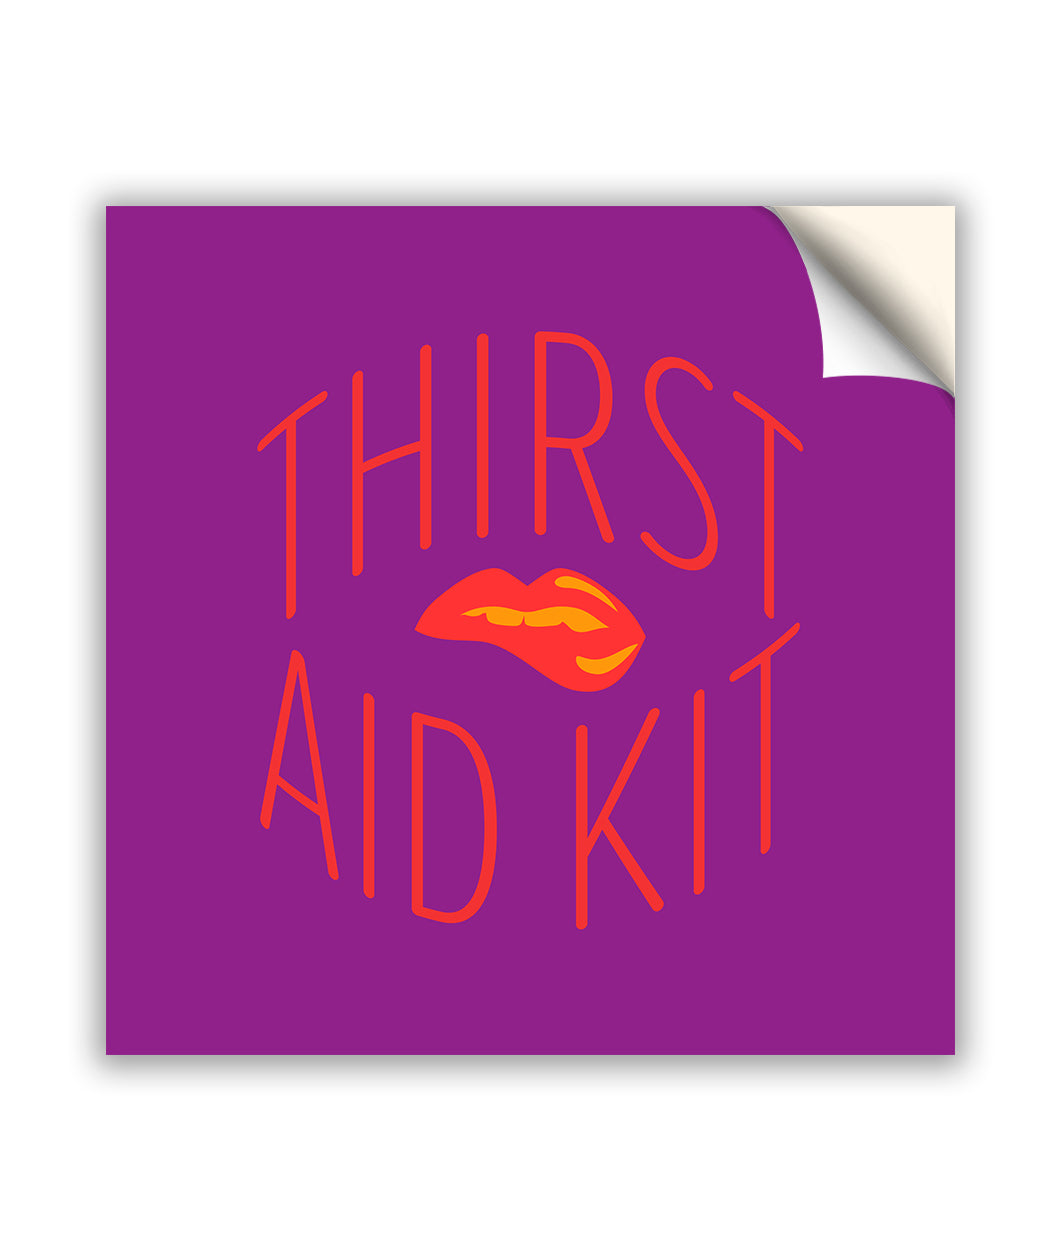 A square, purple sticker. A pair of red lips biting the bottom lip is centered on the sticker. Above it is “Thirst” in thin red text, and below is “Aid Kit.”